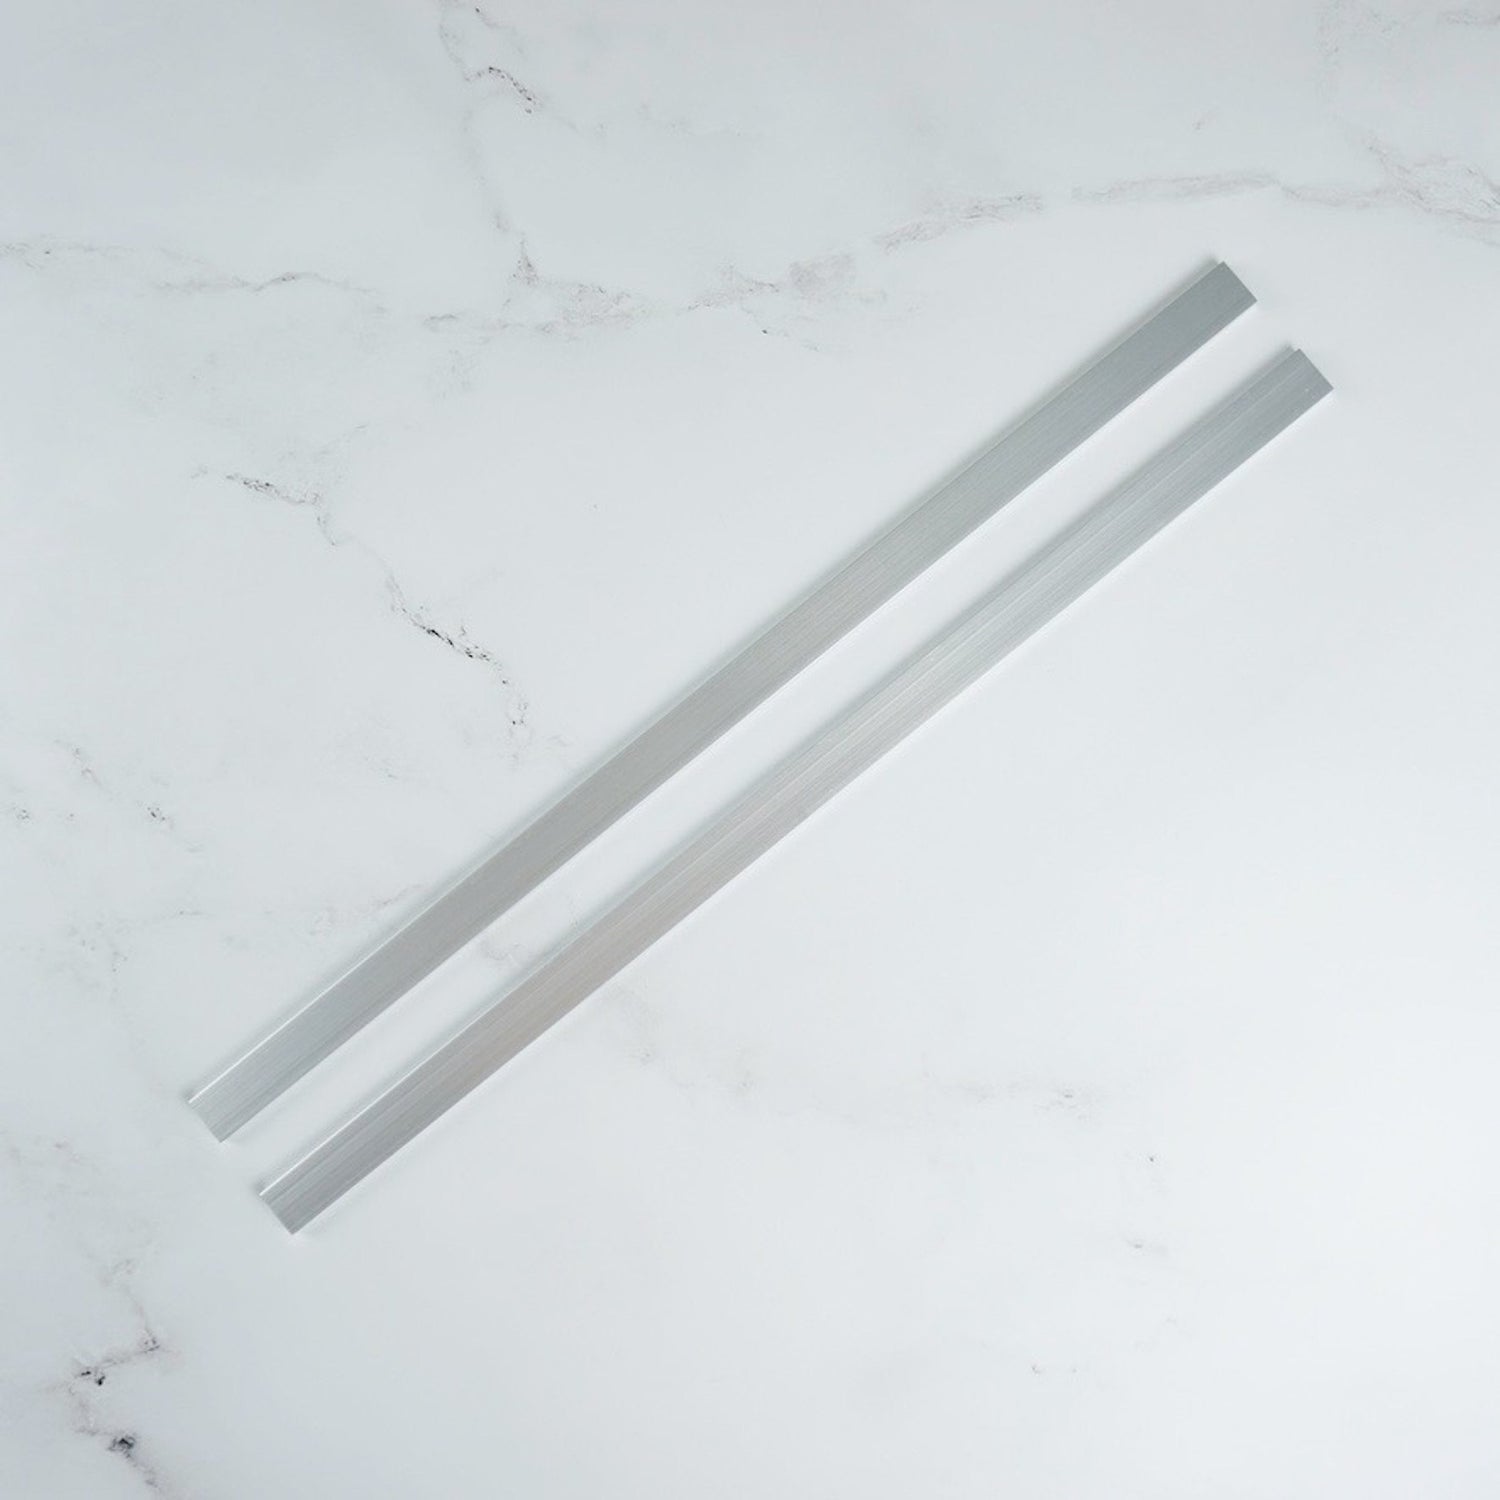 Pastry Ruler - Set of 2 5mm